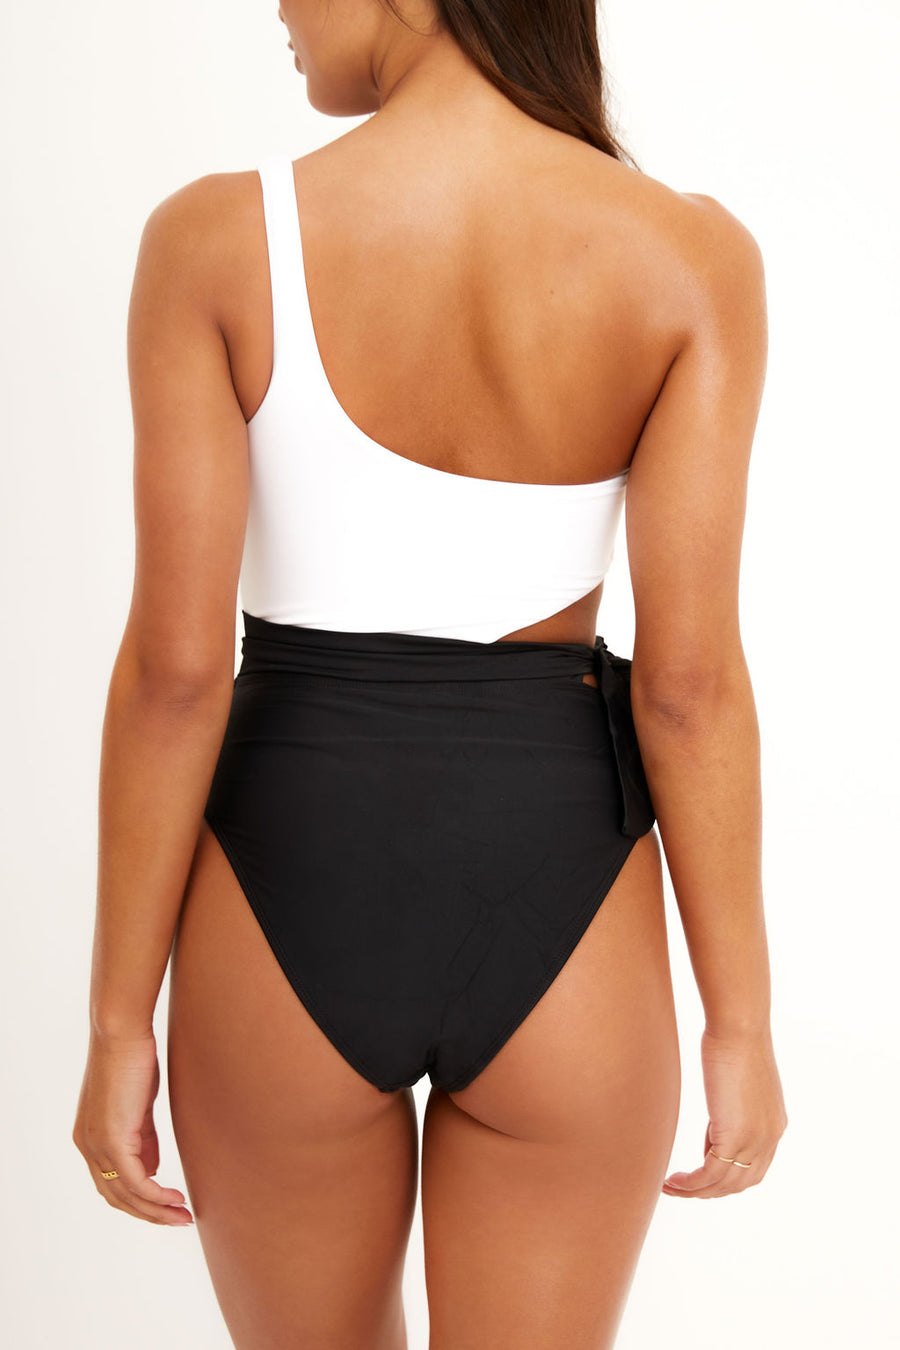 Ibiza Luxe One Shoulder One piece Swimsuit in Black and White (6777373130861)